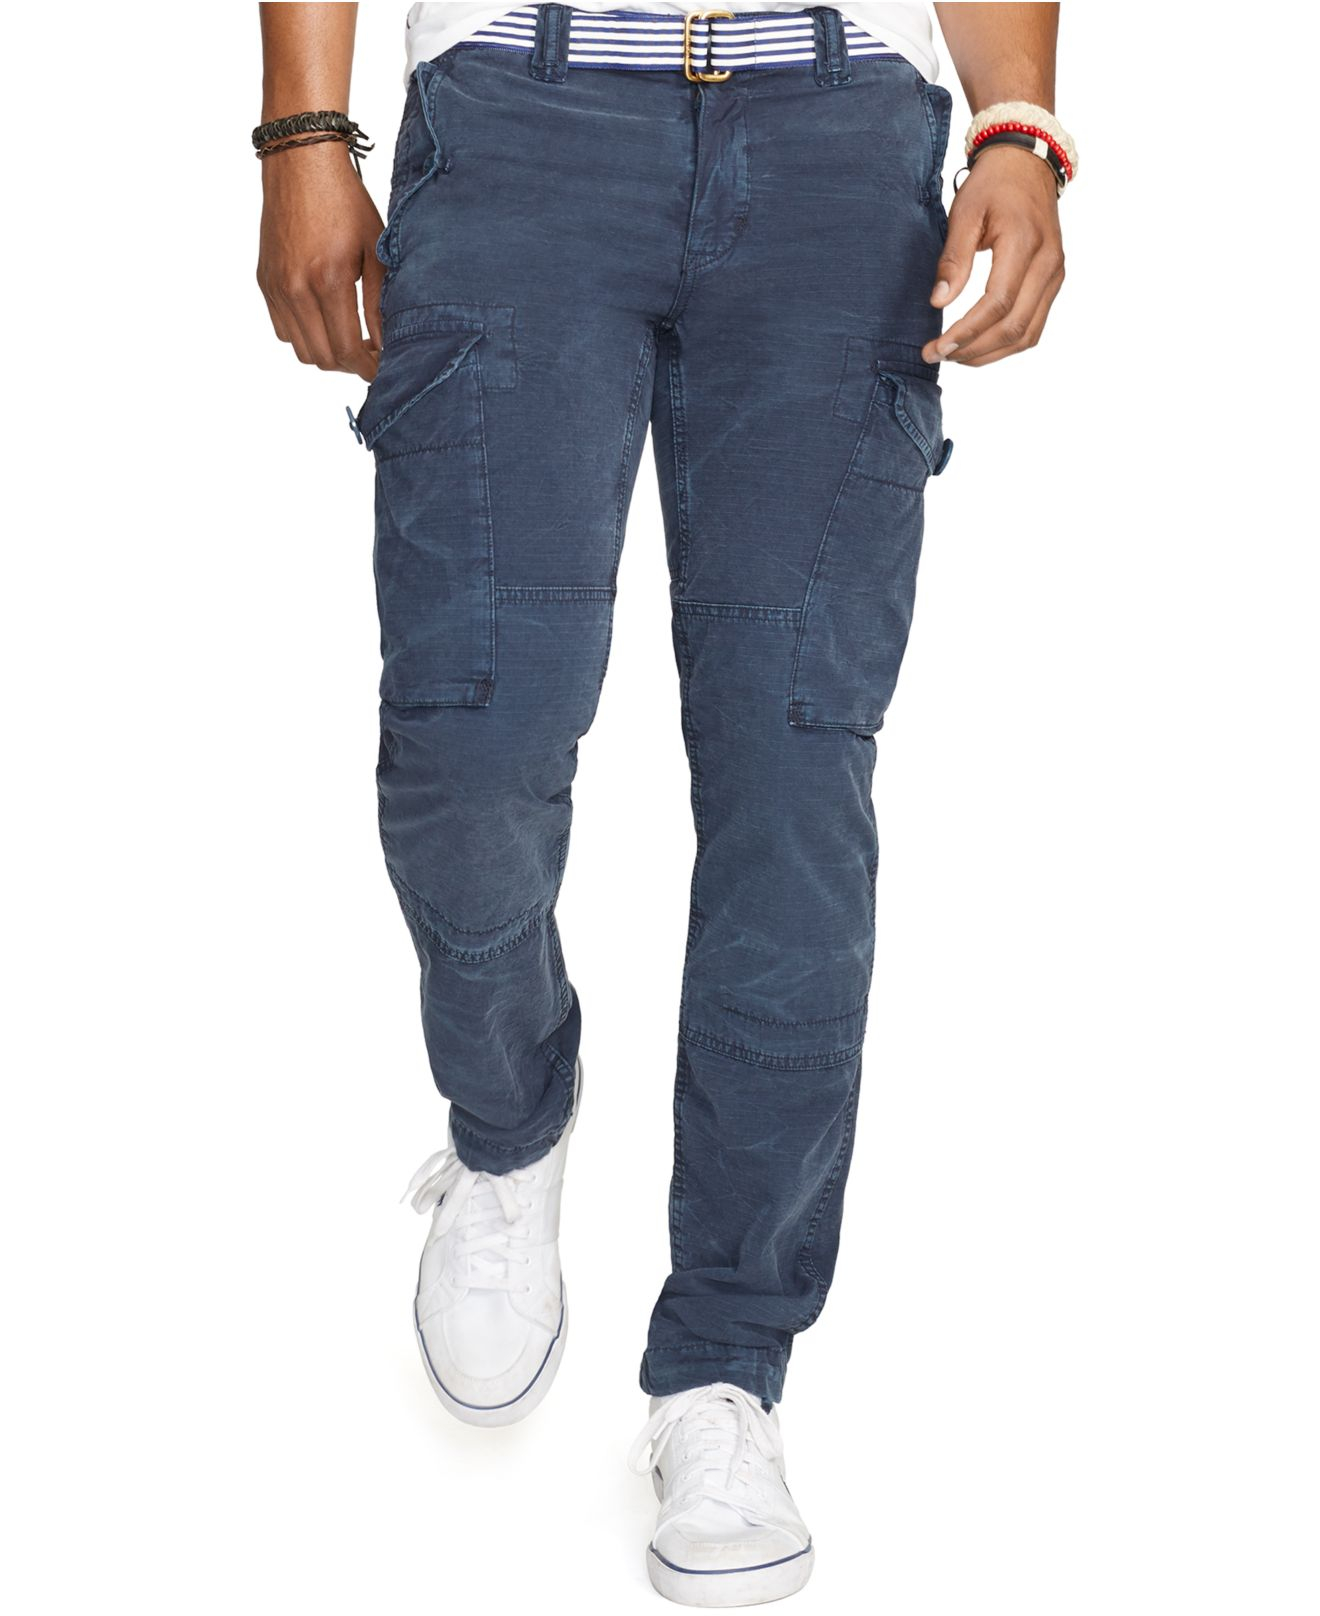 polo and cargo pants, grand bargain UP TO 54% OFF - www.wingspantg.com